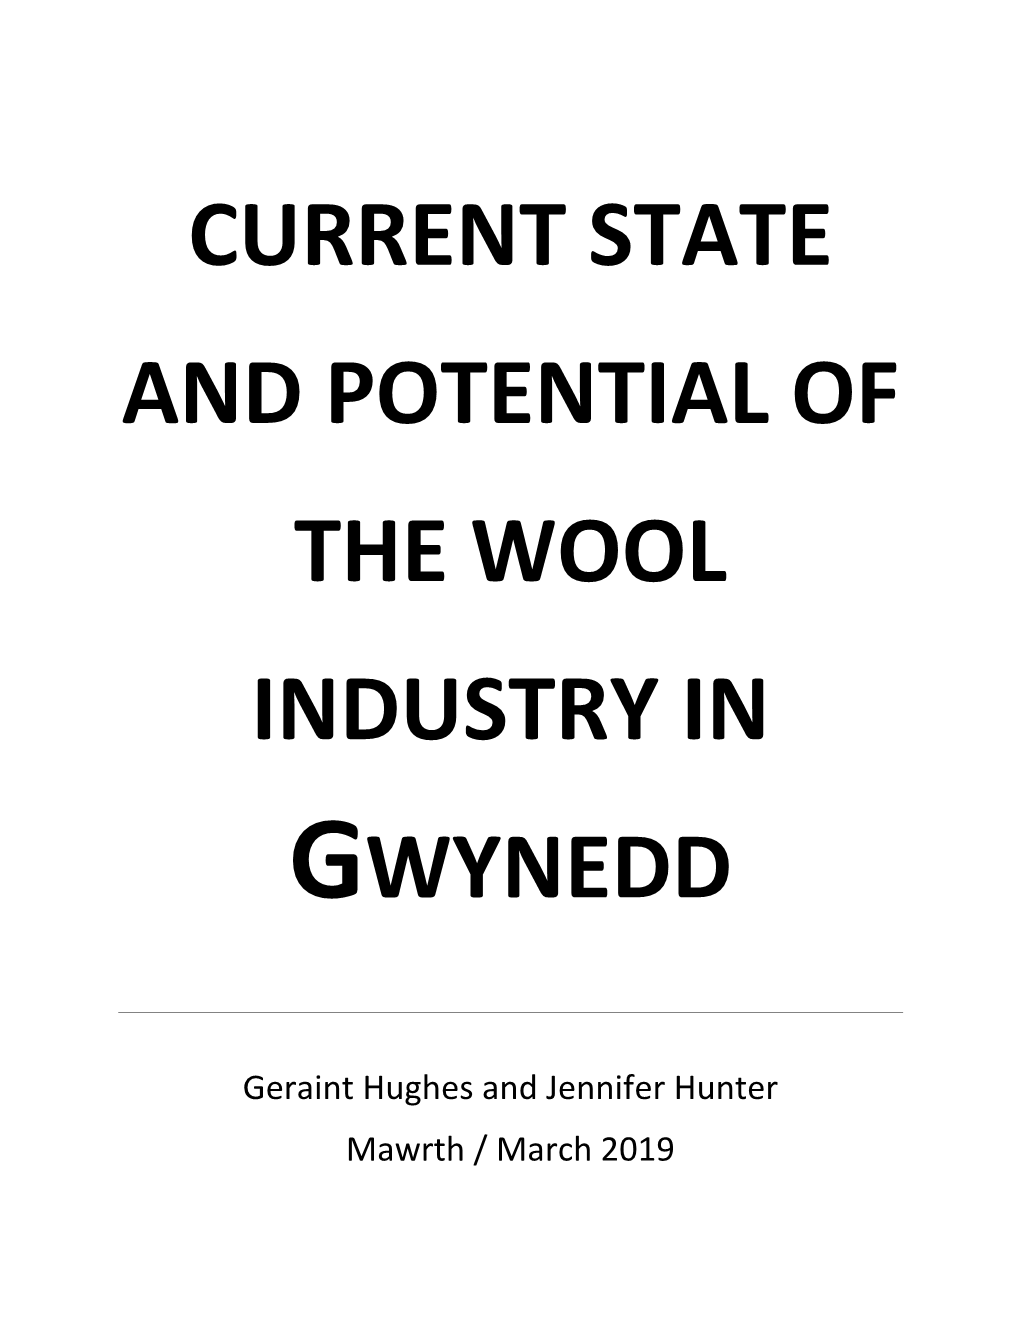 Current State and Potential of the Wool Industry in Gwynedd